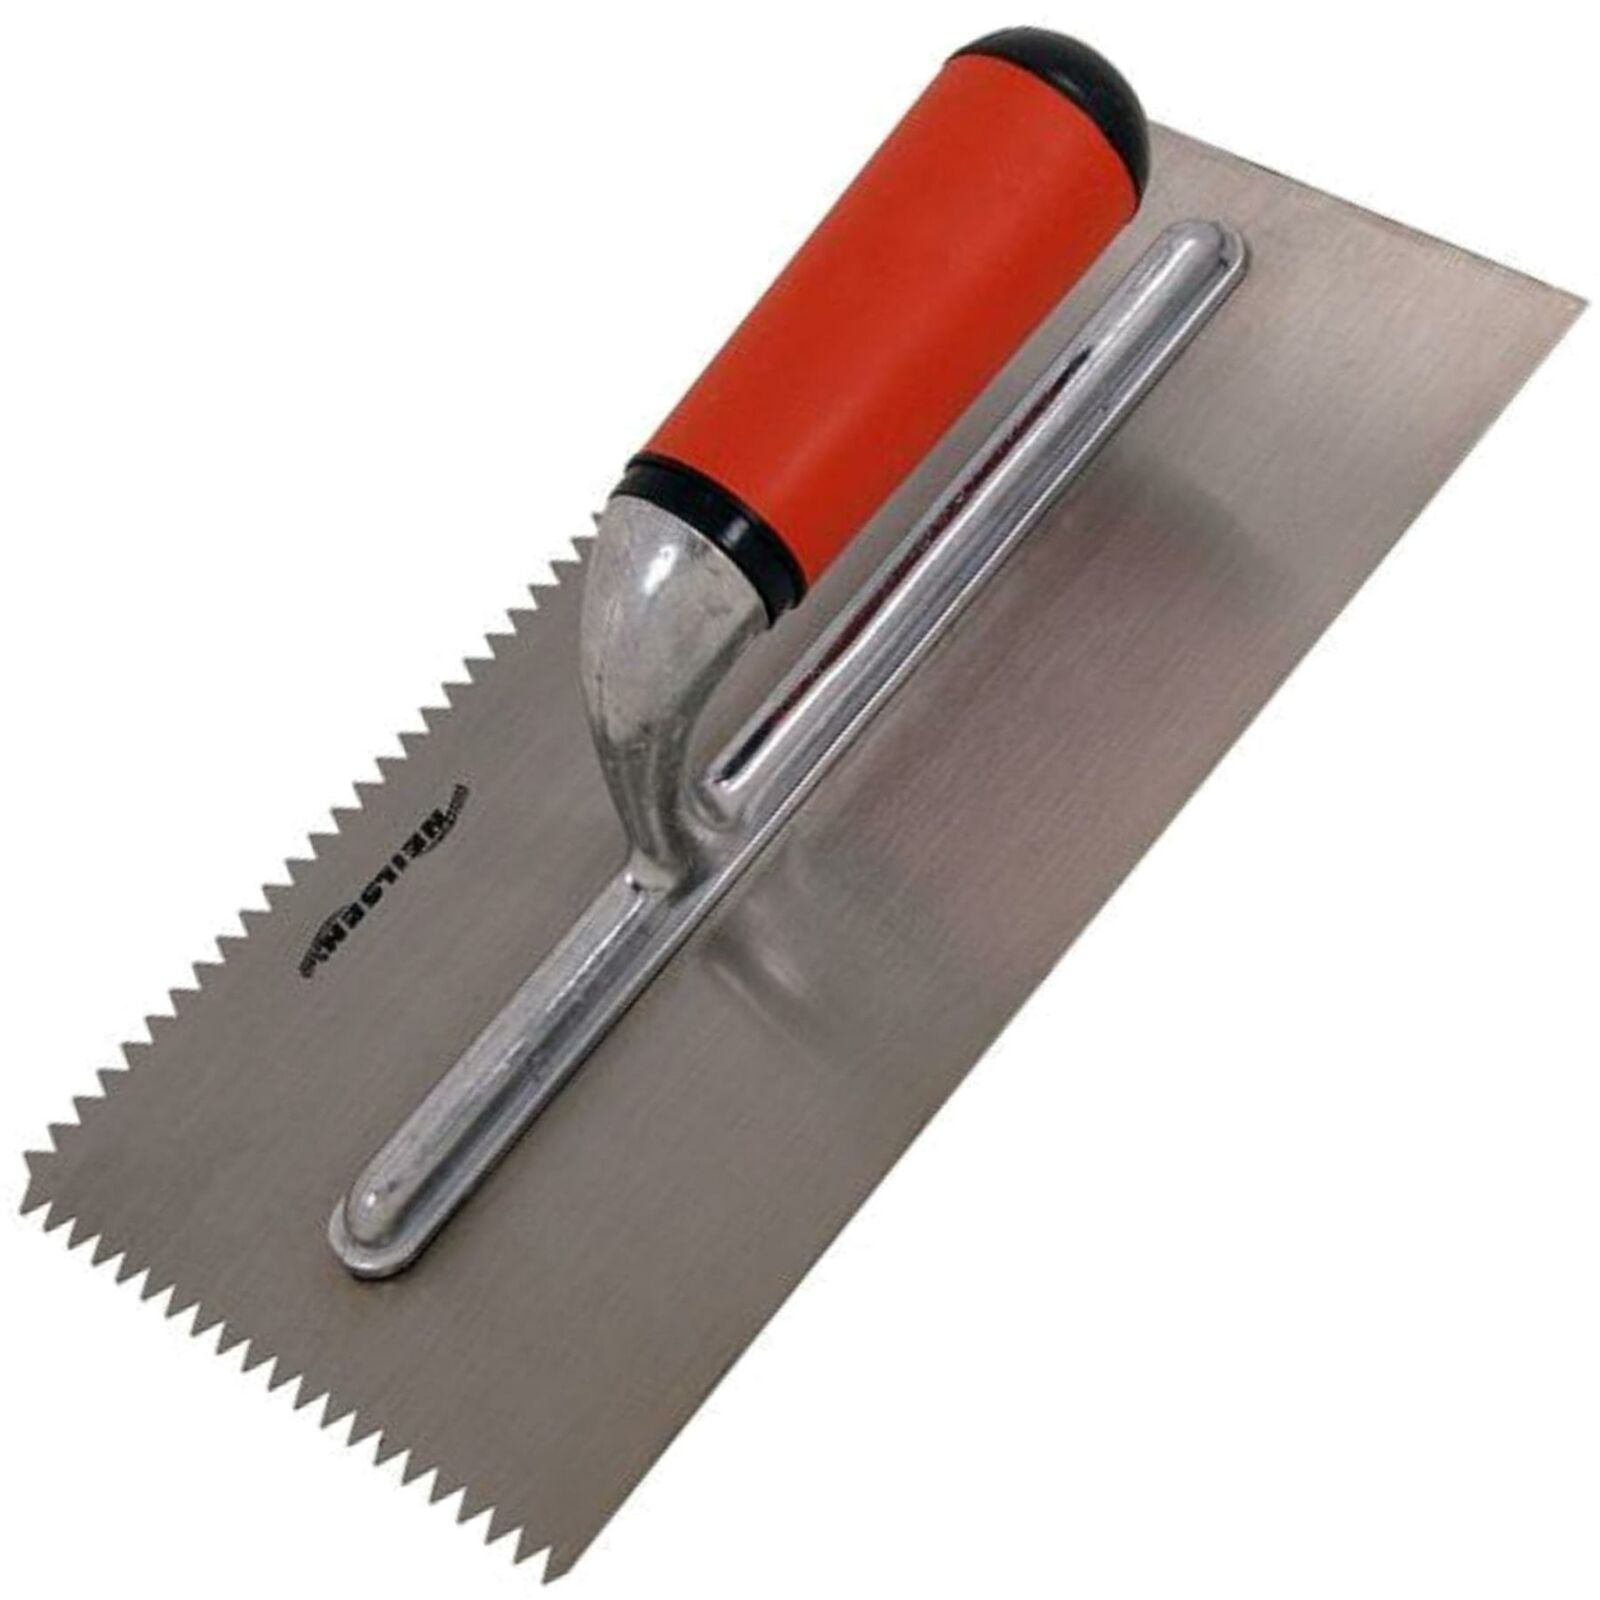 Neilsen 280mm Adhesive Notched Tile Tiling Serrated Spreading Trowel Tool